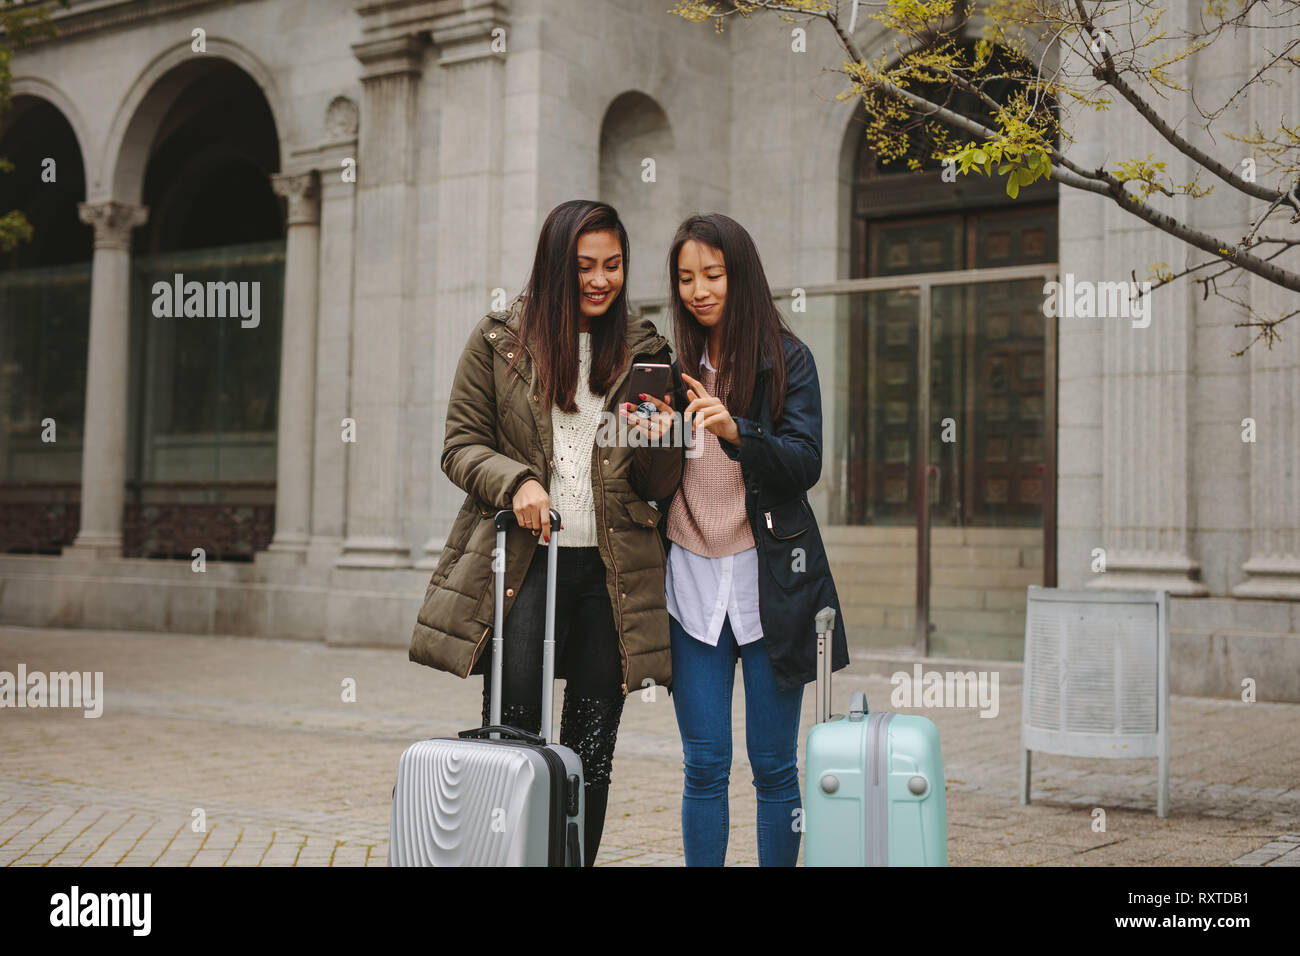 Tourist women standing in street with luggage bags looking for directions in cell phone. Two smiling asian tourists looking at mobile phone. Stock Photo